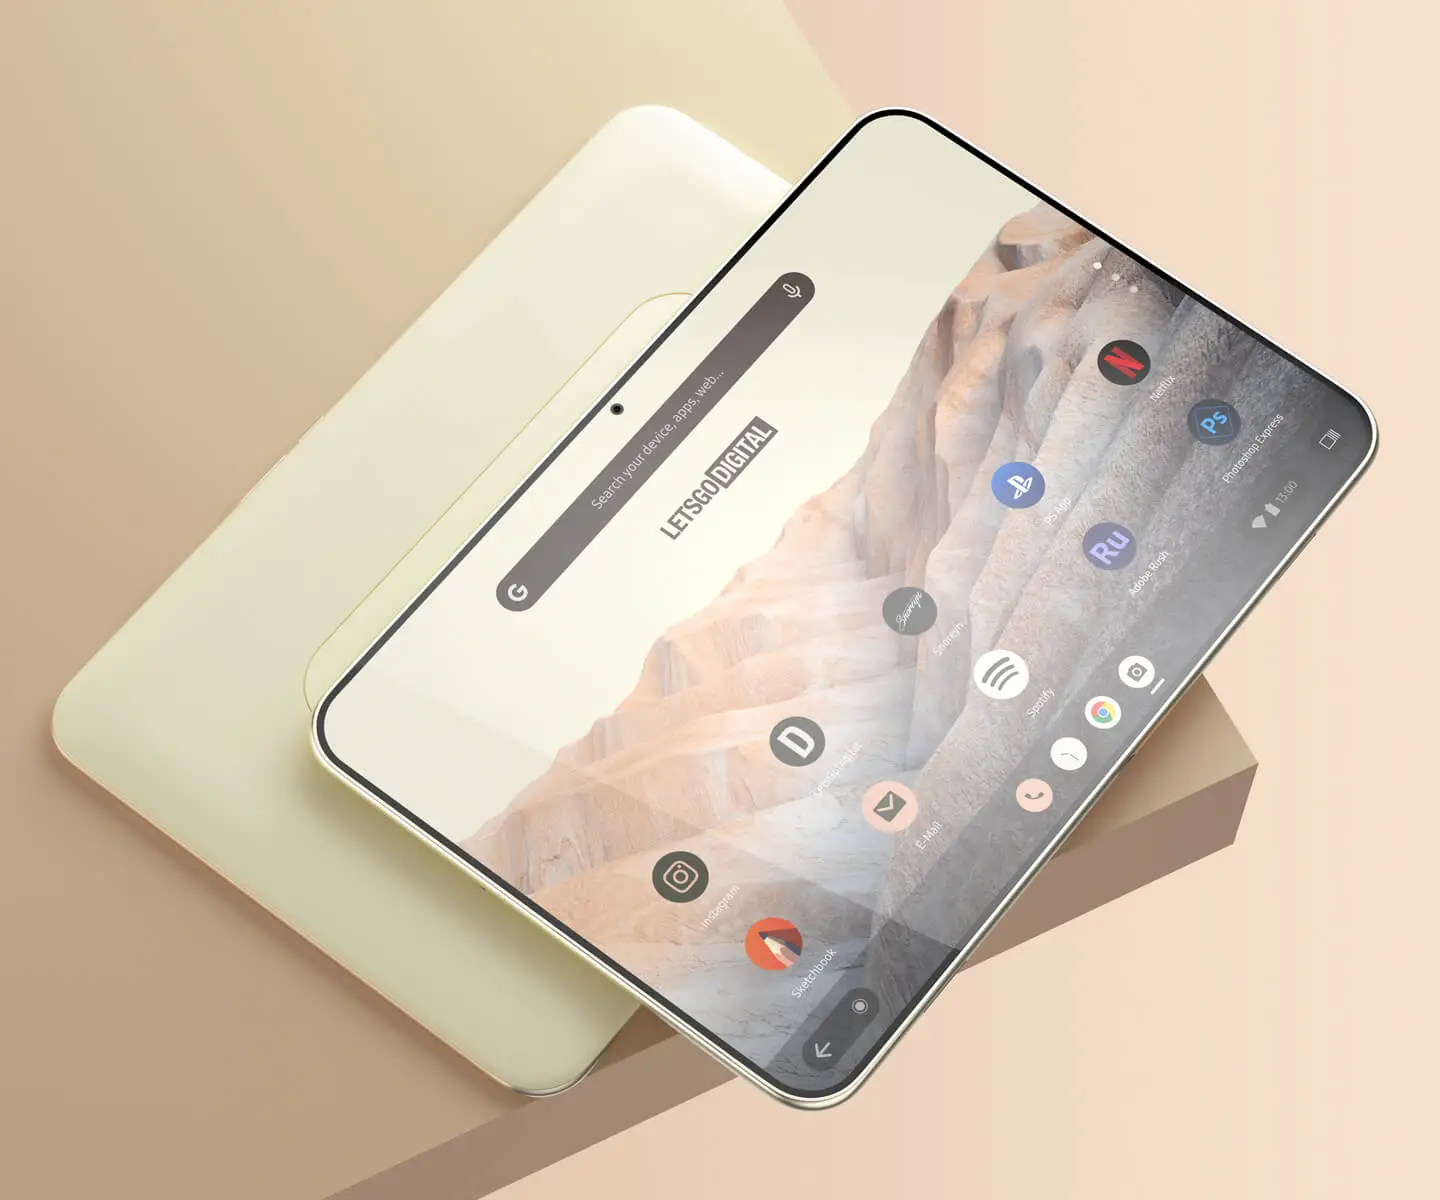 New renders show off supposed Google Pixel tablet based on patents